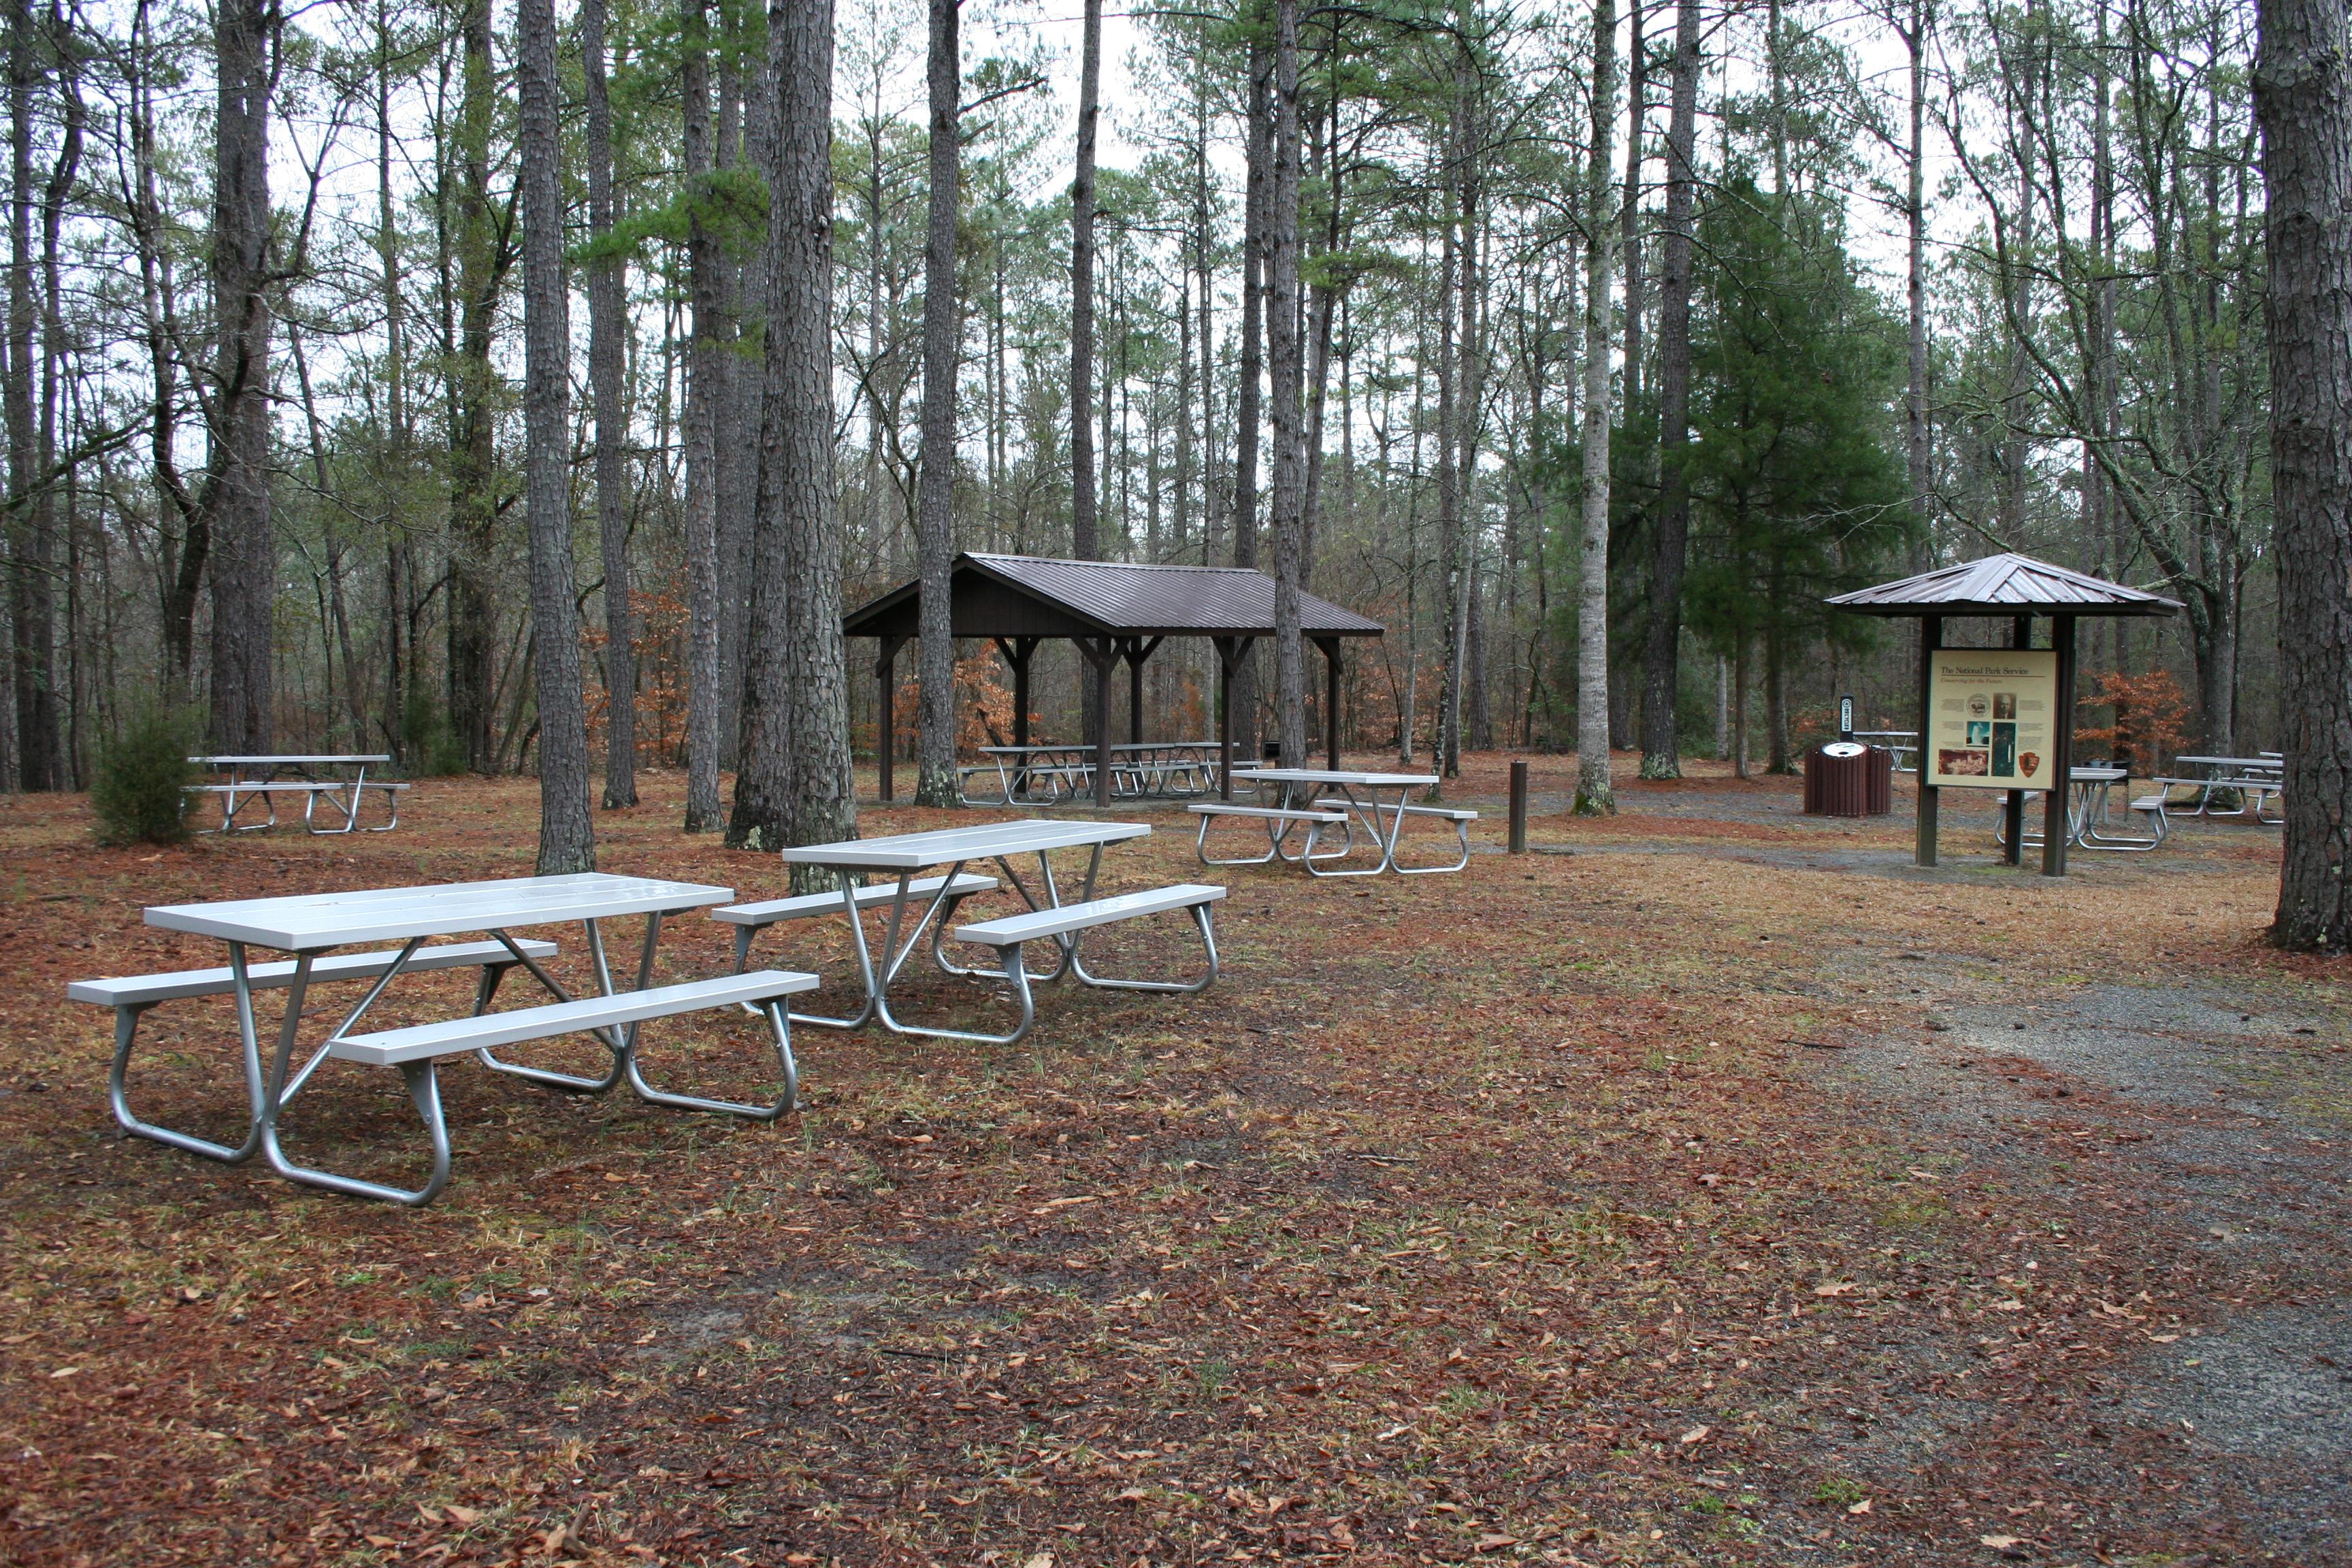 picnic tables, pavilion, and wayside exhibit in main picnic area